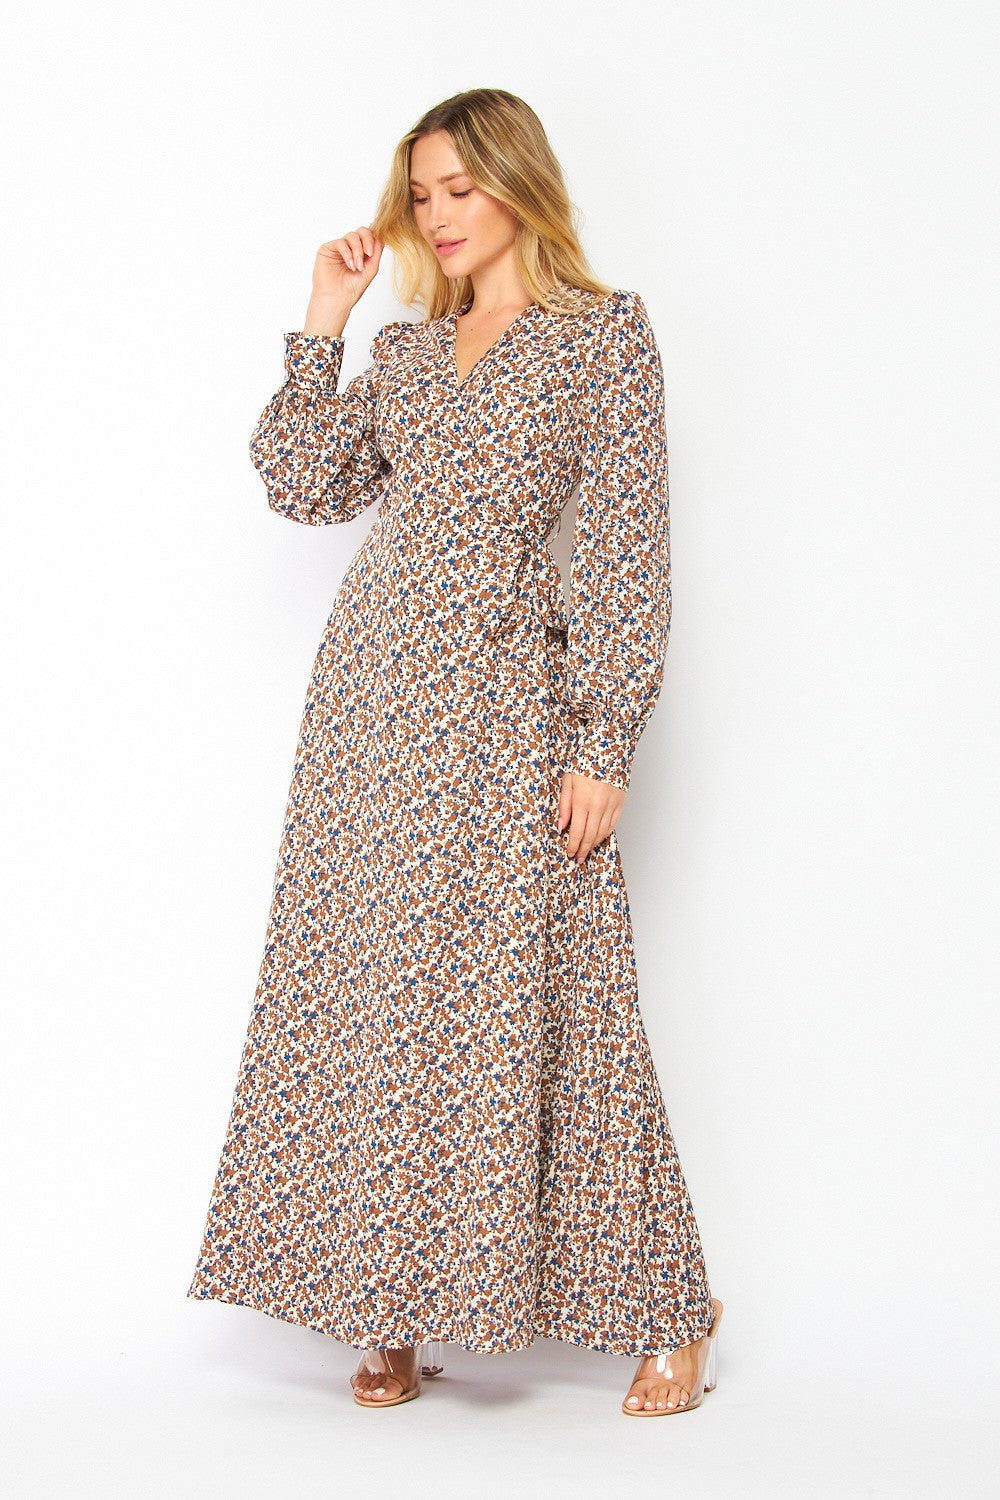 Maxi Length Brown Floral Wrap Style Dress with Sash